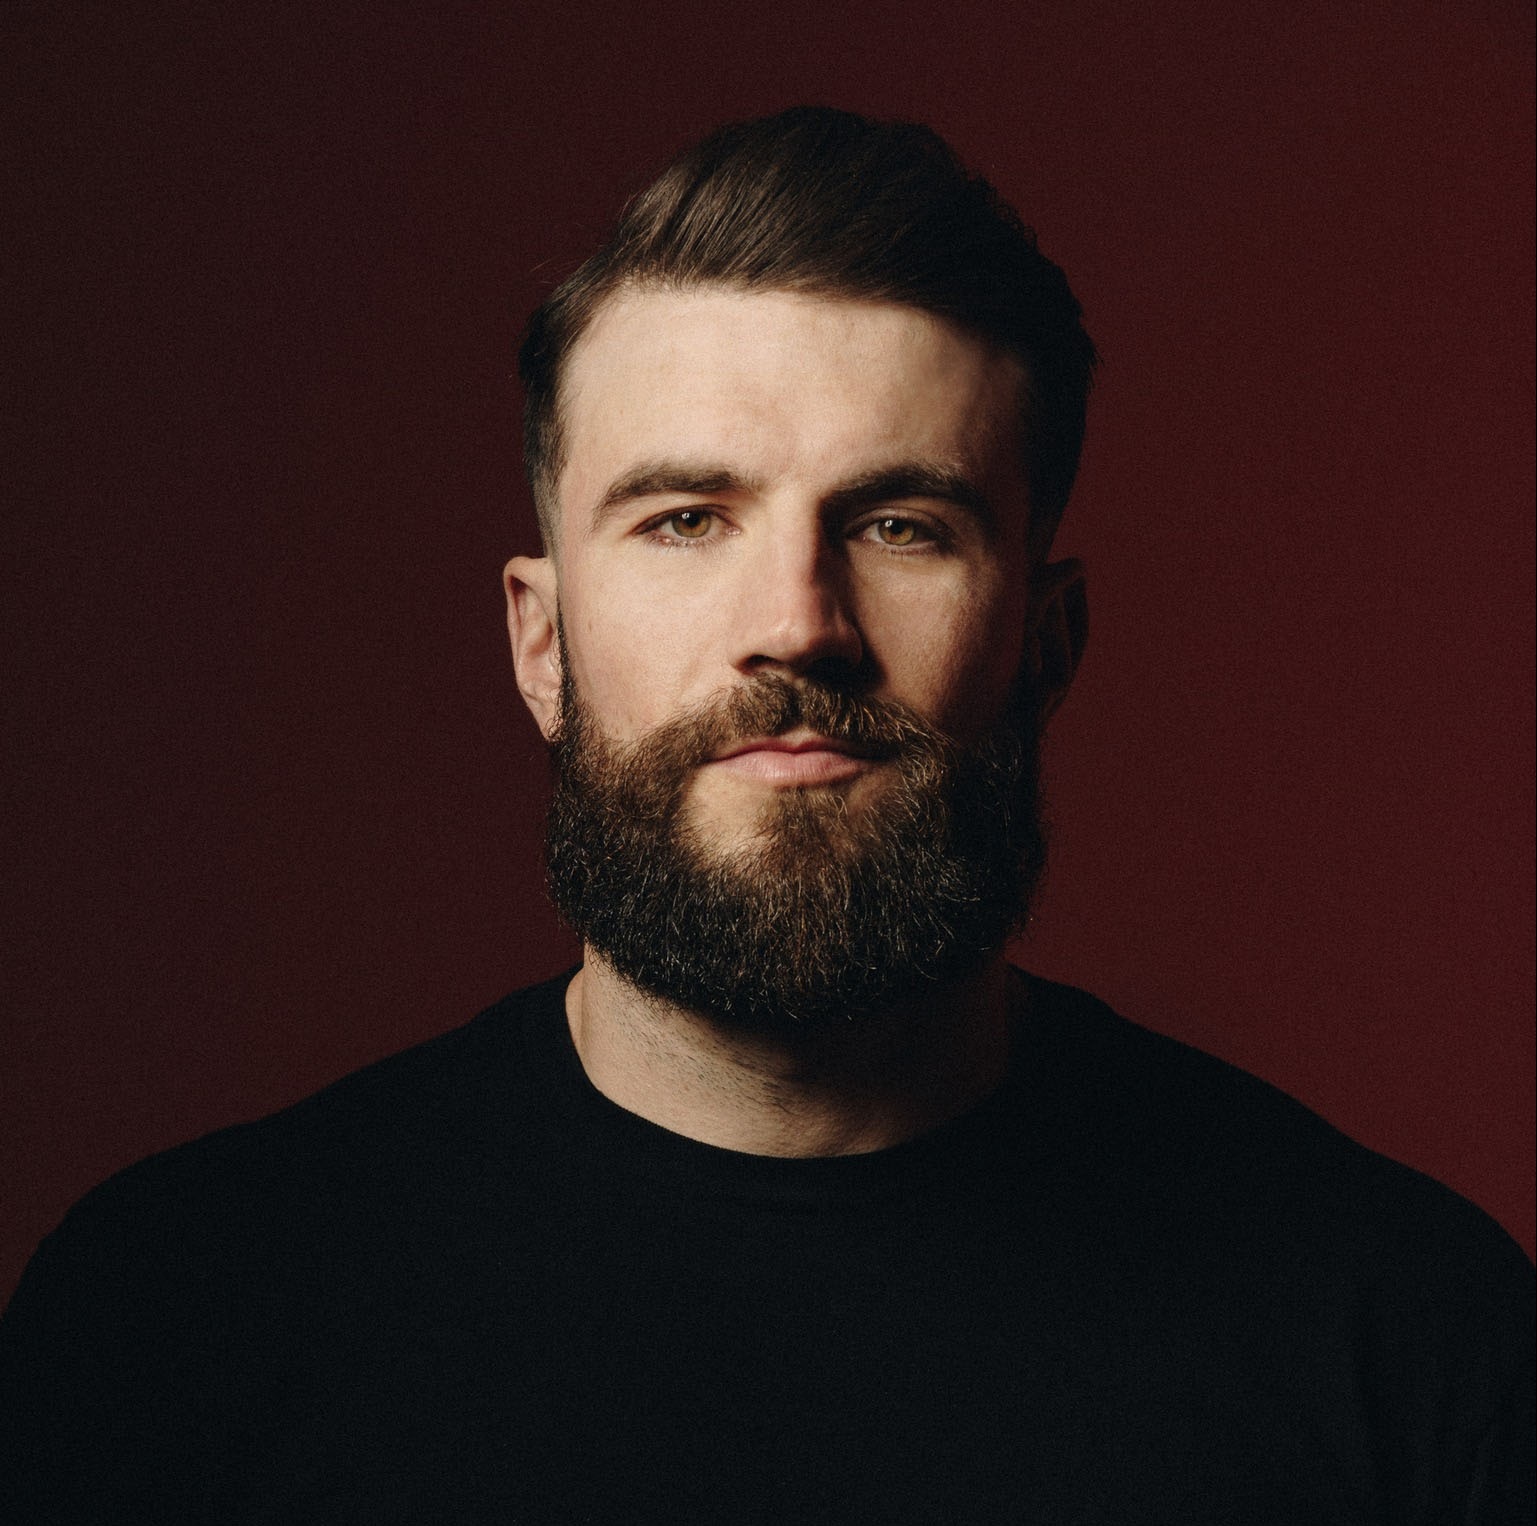 SAM HUNT IS LOOKING FORWARD TO PERFORMING AT THE INDY 500 THIS WEEKEND.